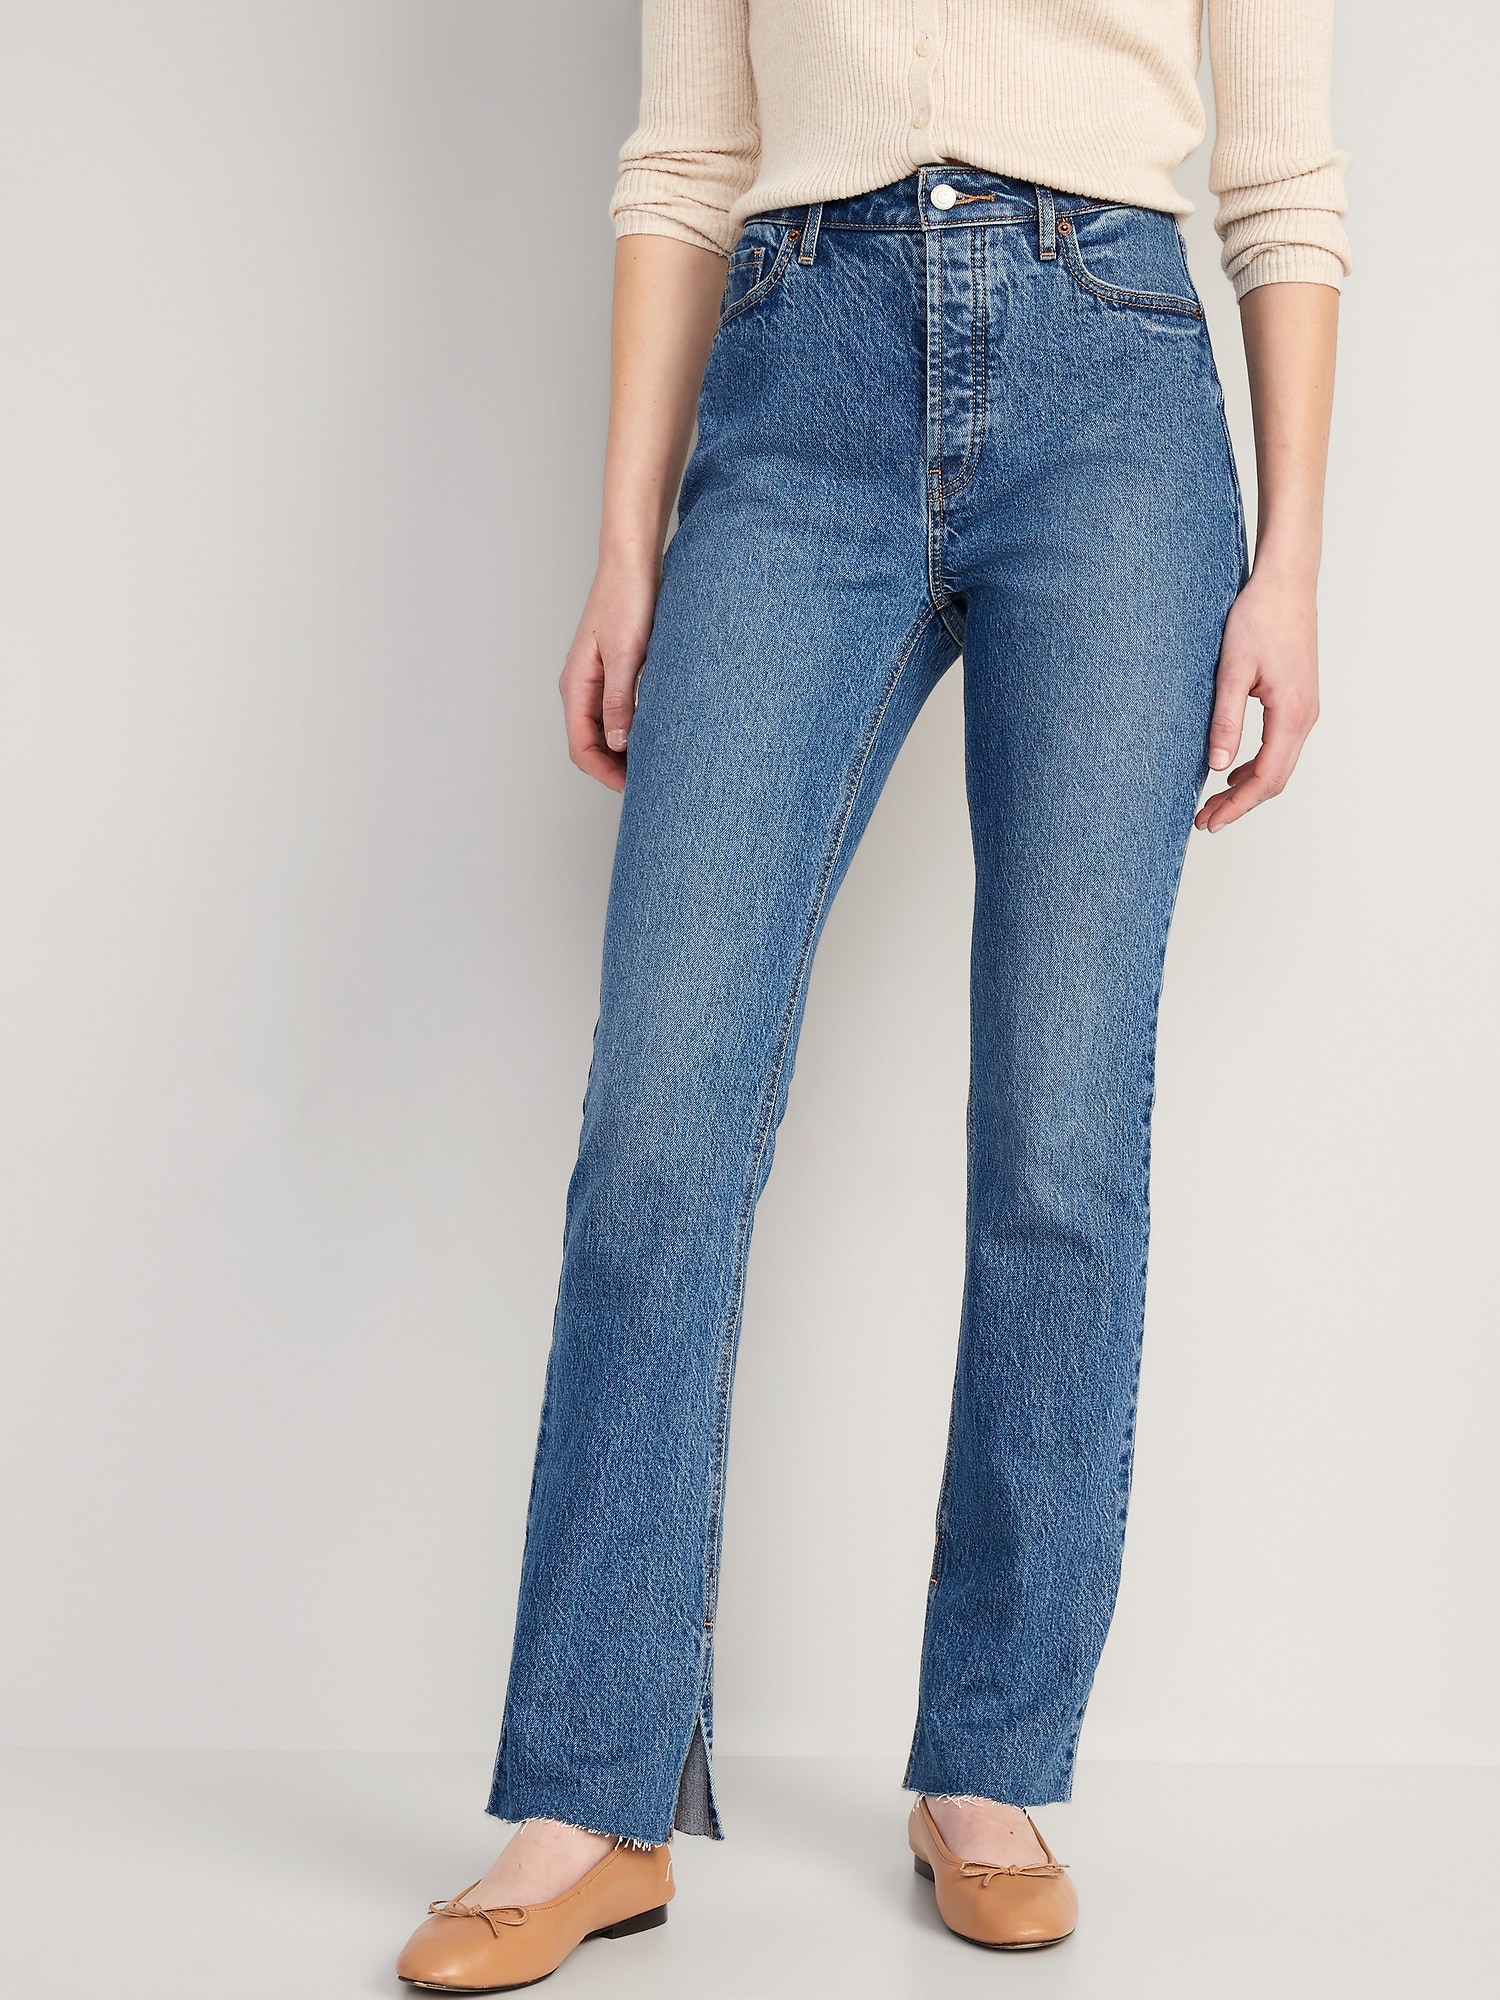 Extra High-Waisted Button-Fly Kicker Boot-Cut Jeans | Old Navy